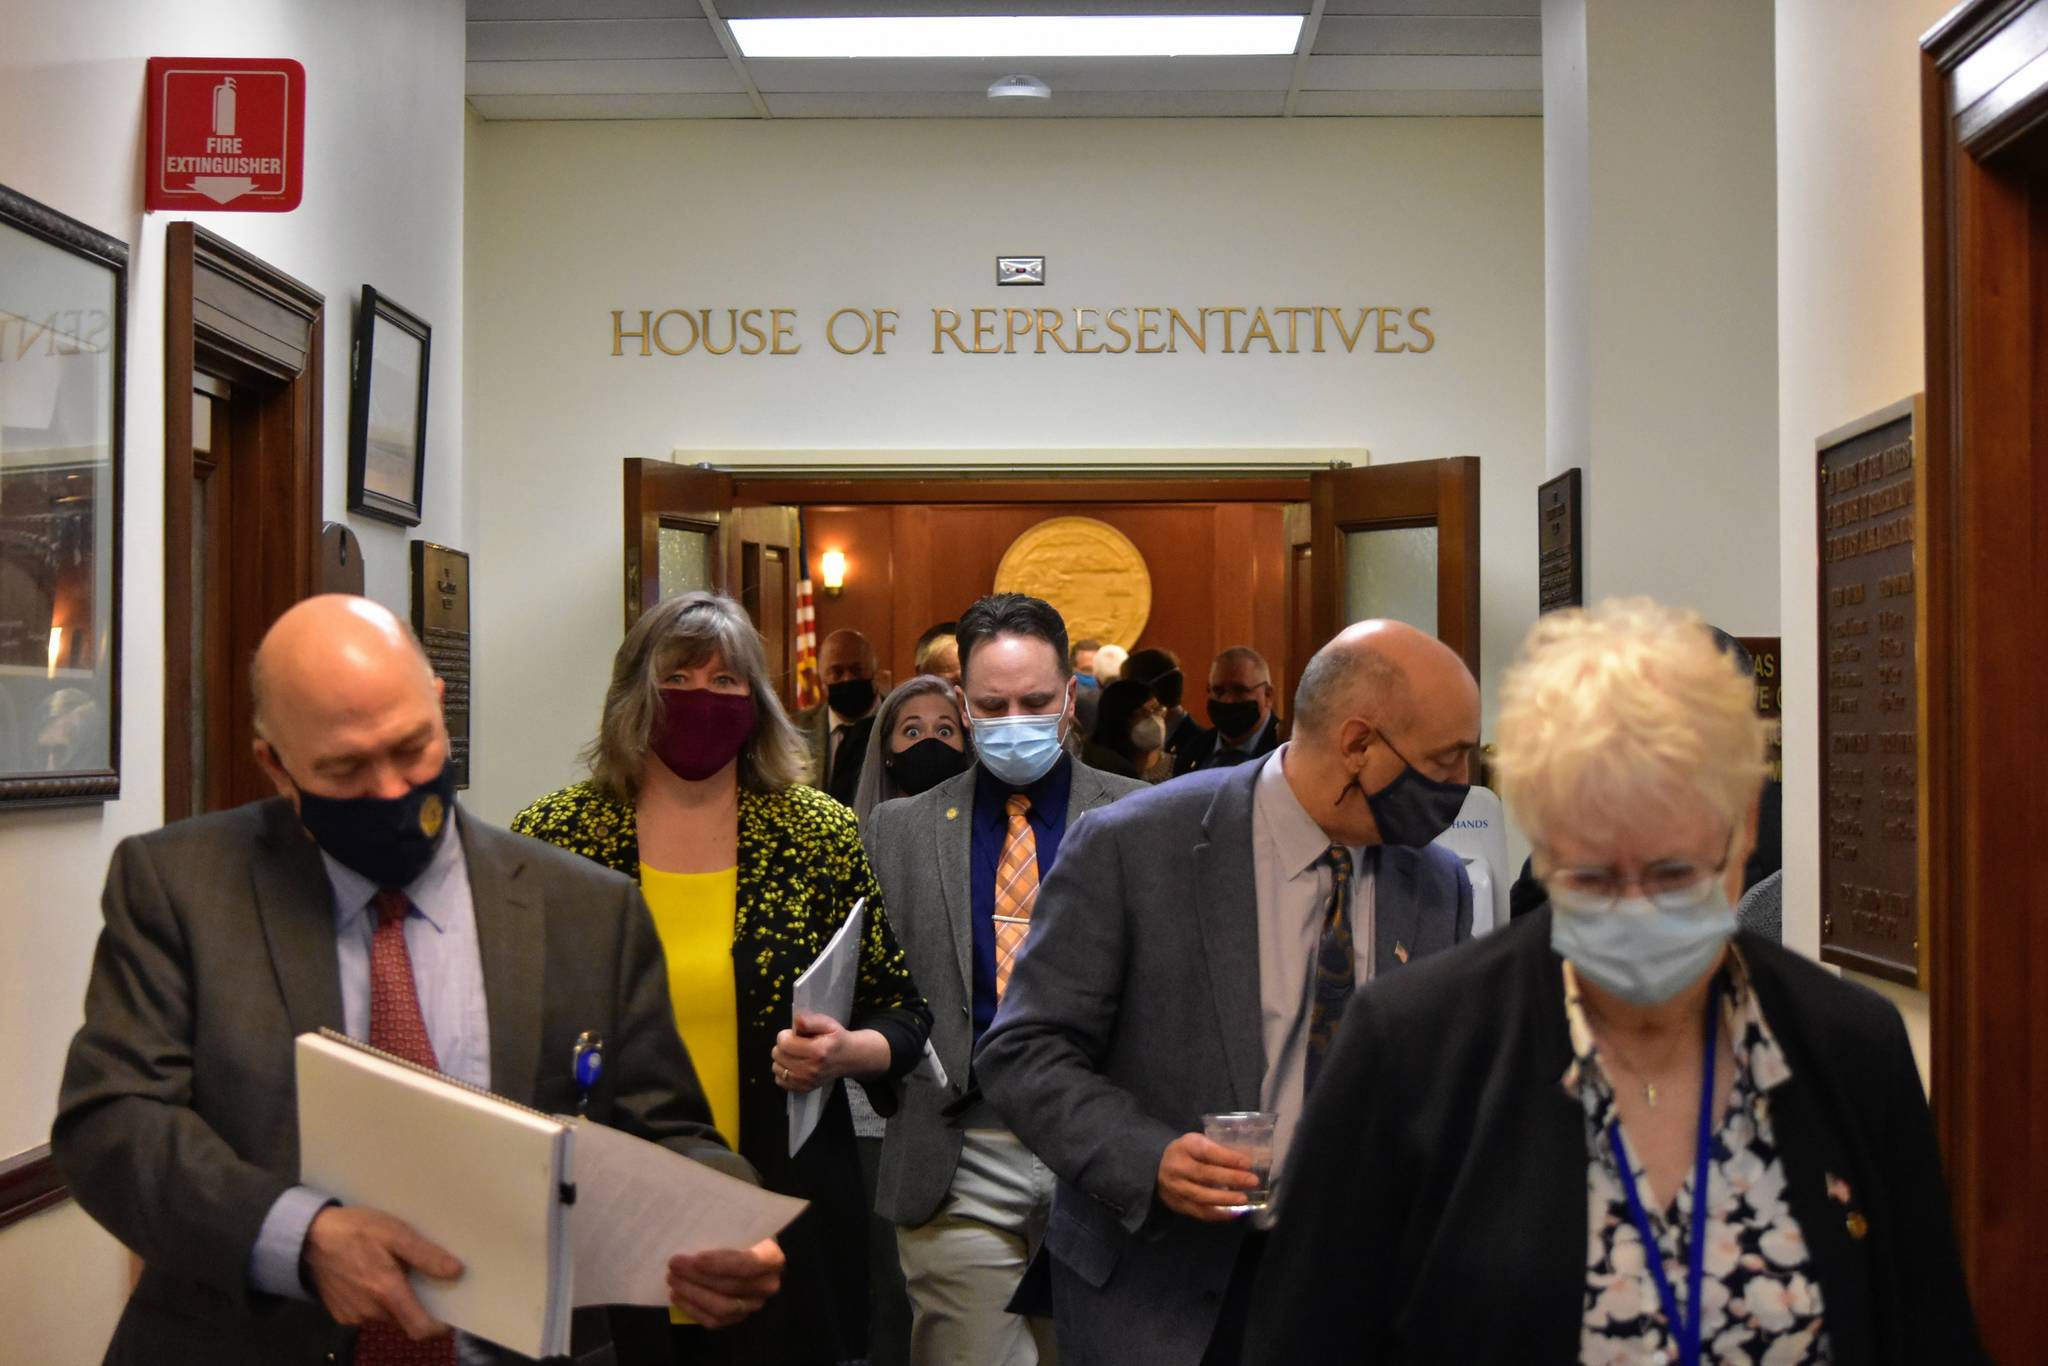 Members of the House of Representatives leave the chamber Wednesday, Feb. 3,. after failing to elect a temporary speaker, part of a deadlock that was broken Thursday, when Rep. Josiah Patkotak was elected speaker pro tem. (Peter Segall / Juneau Empire)